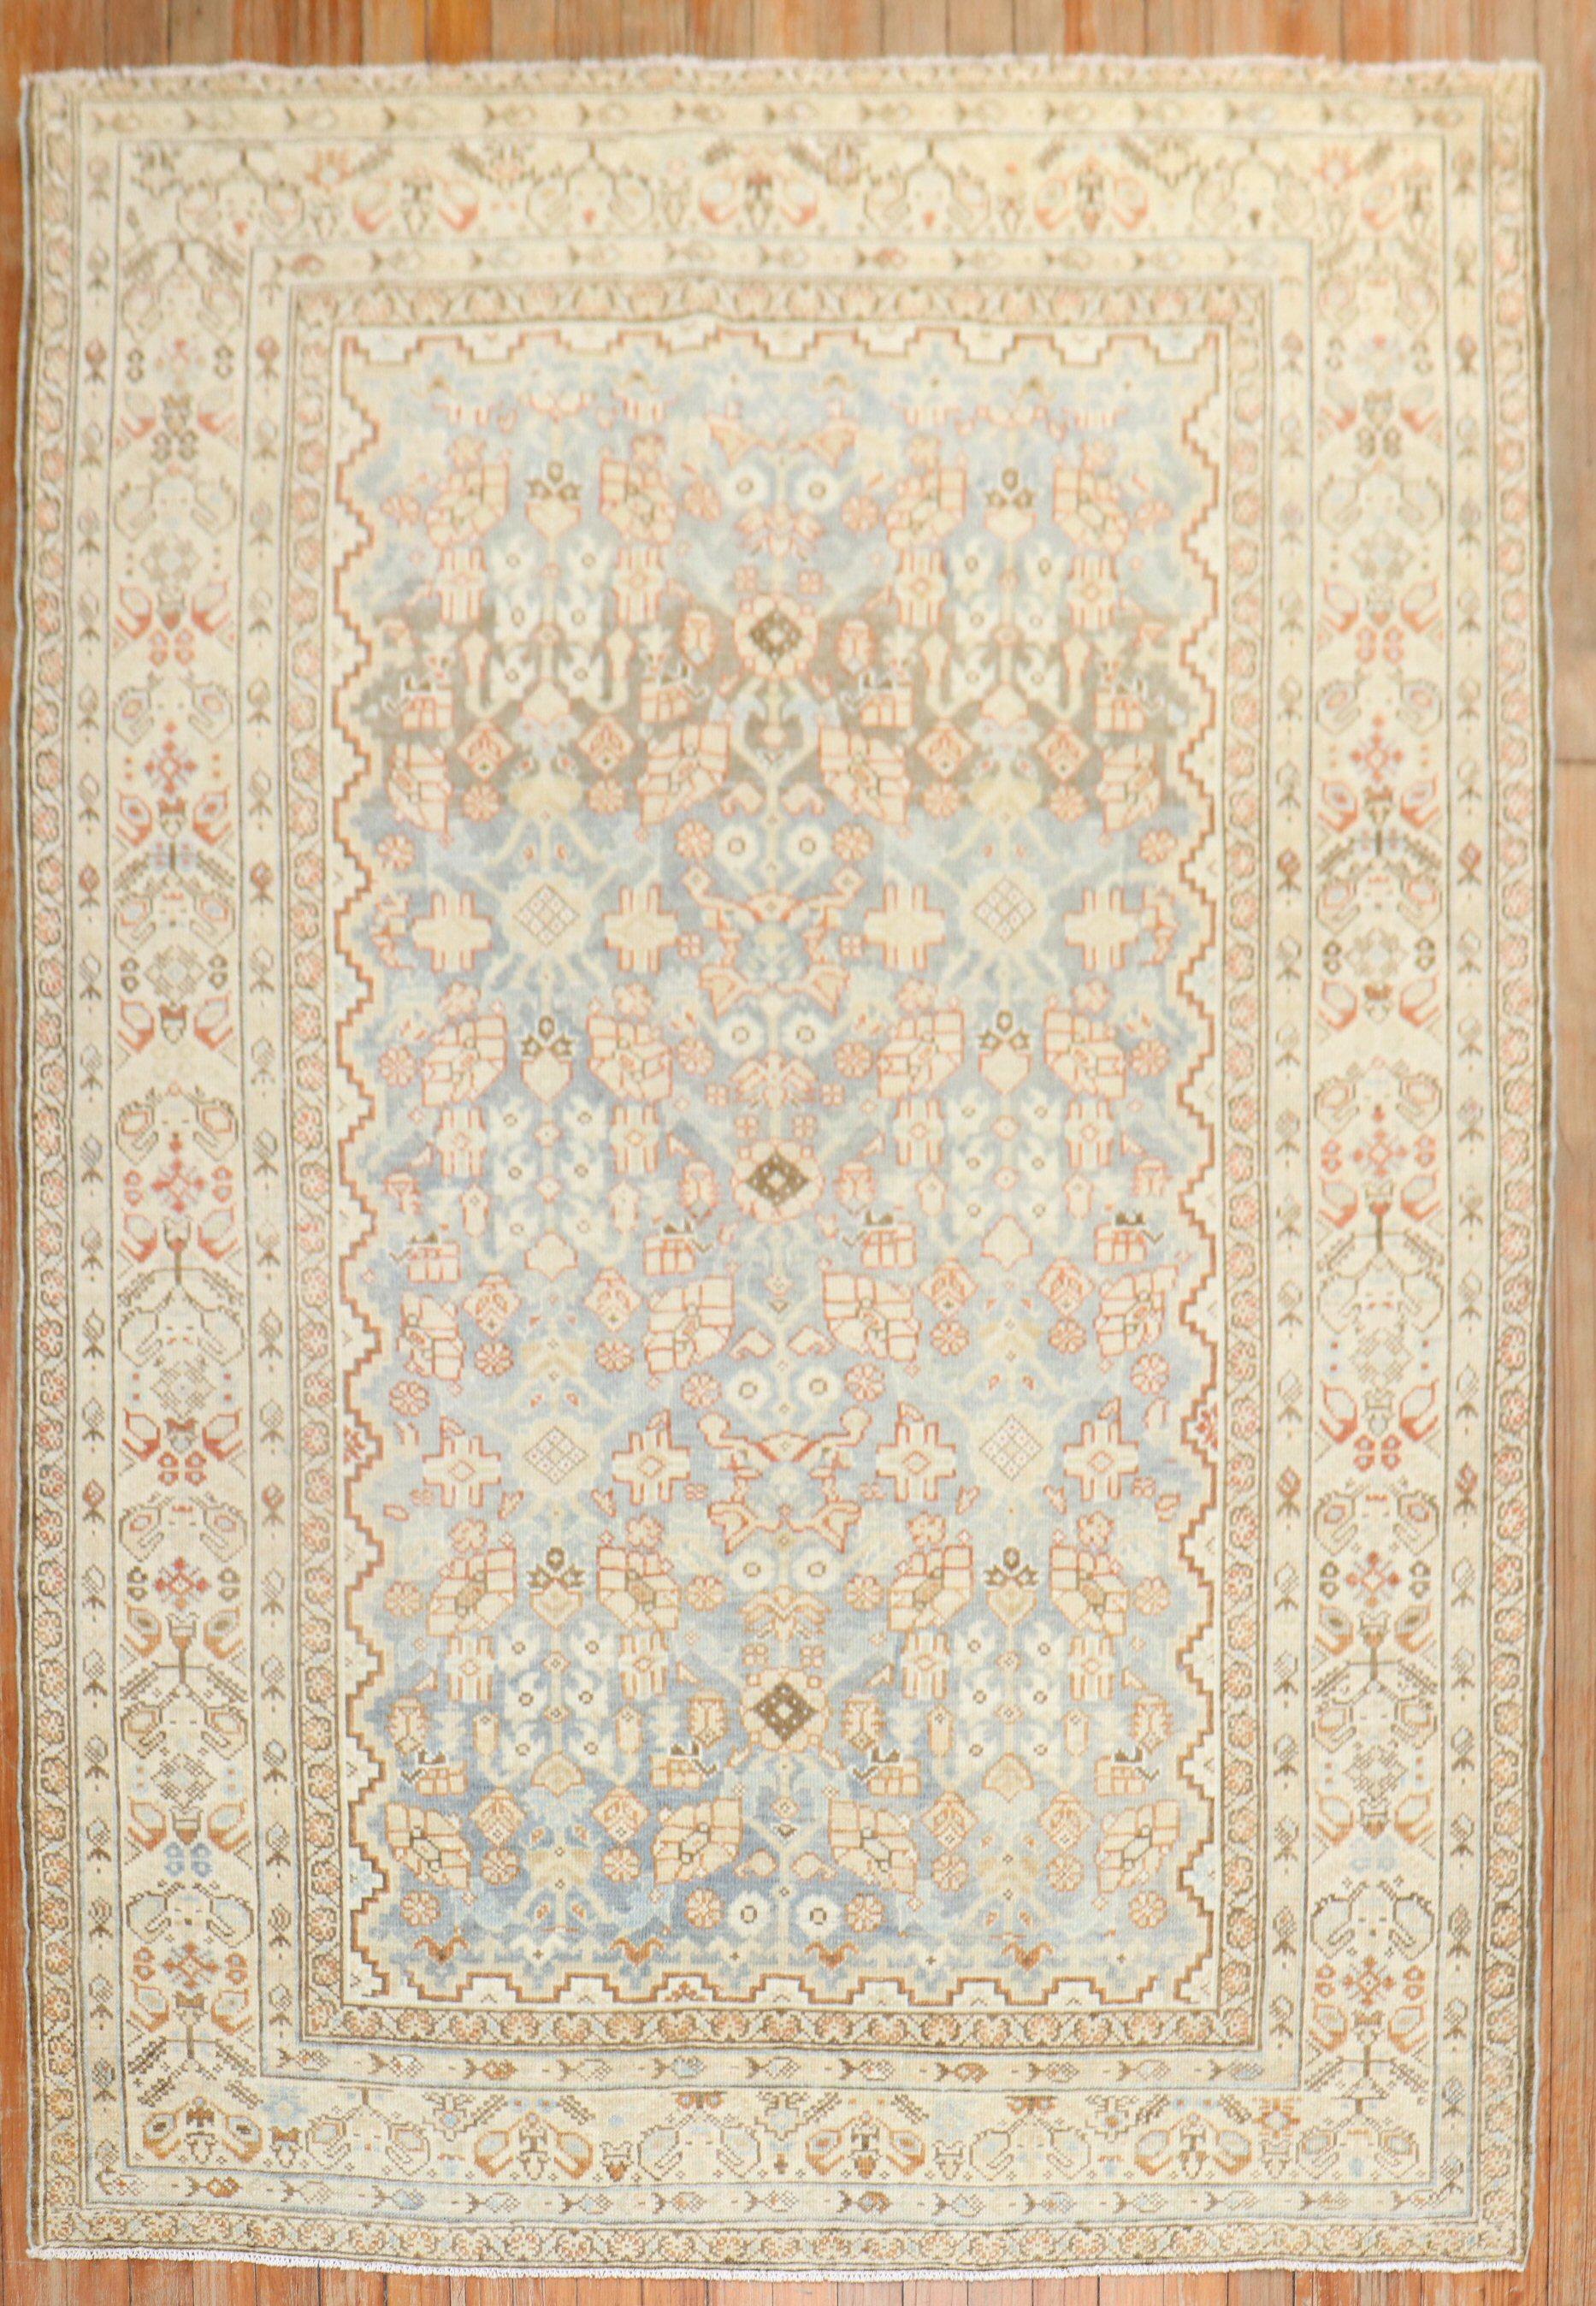 An accent size early 20th century Persian Malayer rug in predominantly light blue

Measures: 4'6